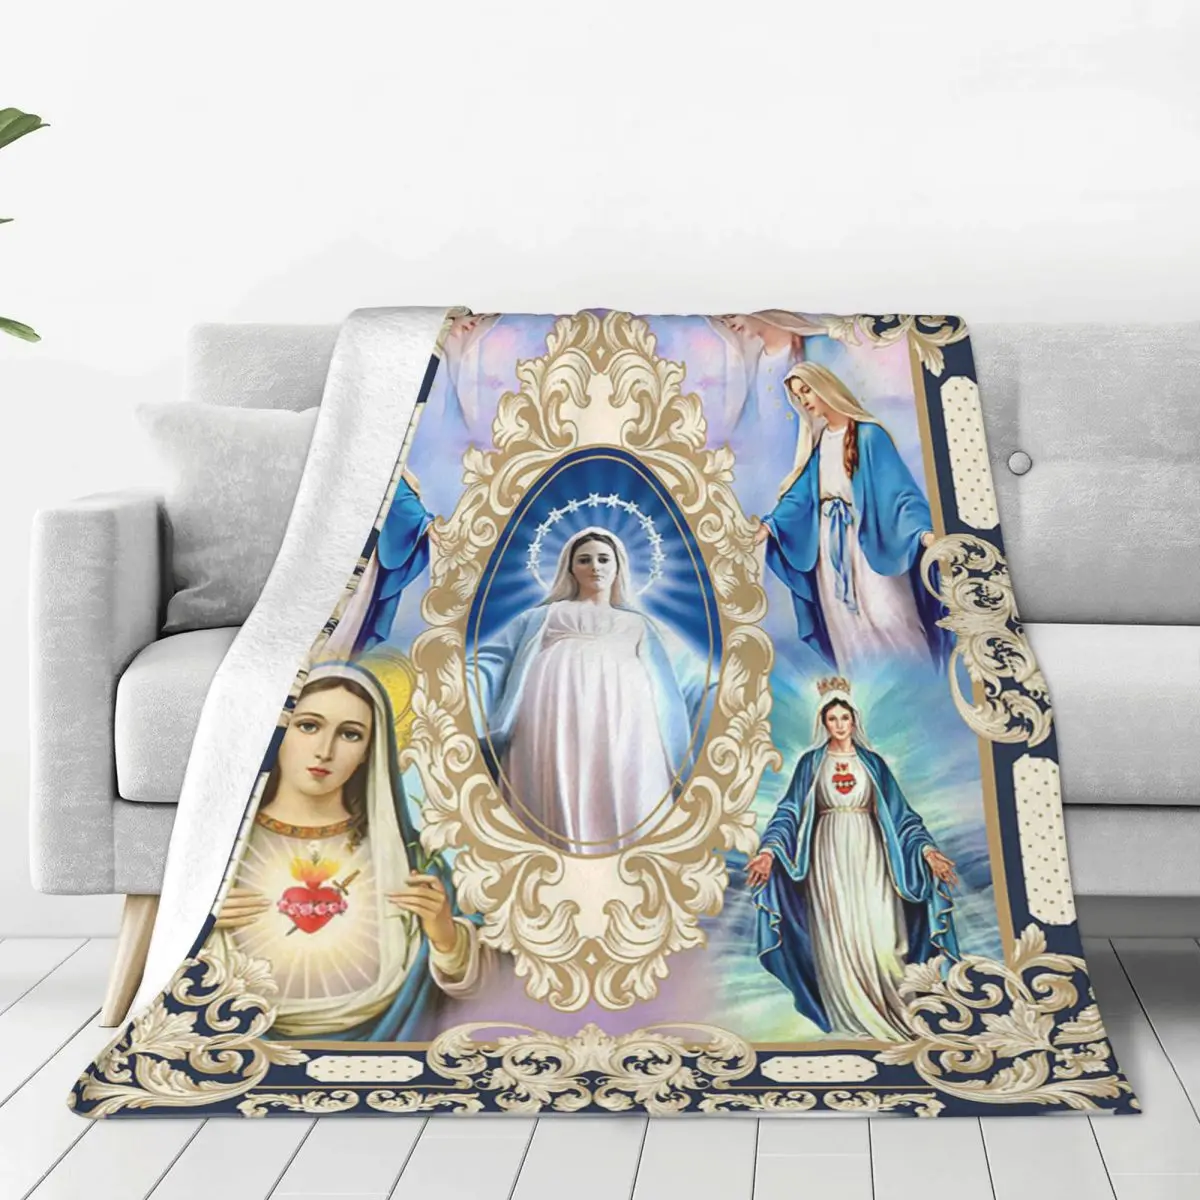 

Our Lady Of Guadalupe Blanket Cover Virgin Mary Jesus Christian Throw Blanket Airplane Travel Decoration Lightweight Bedsprea